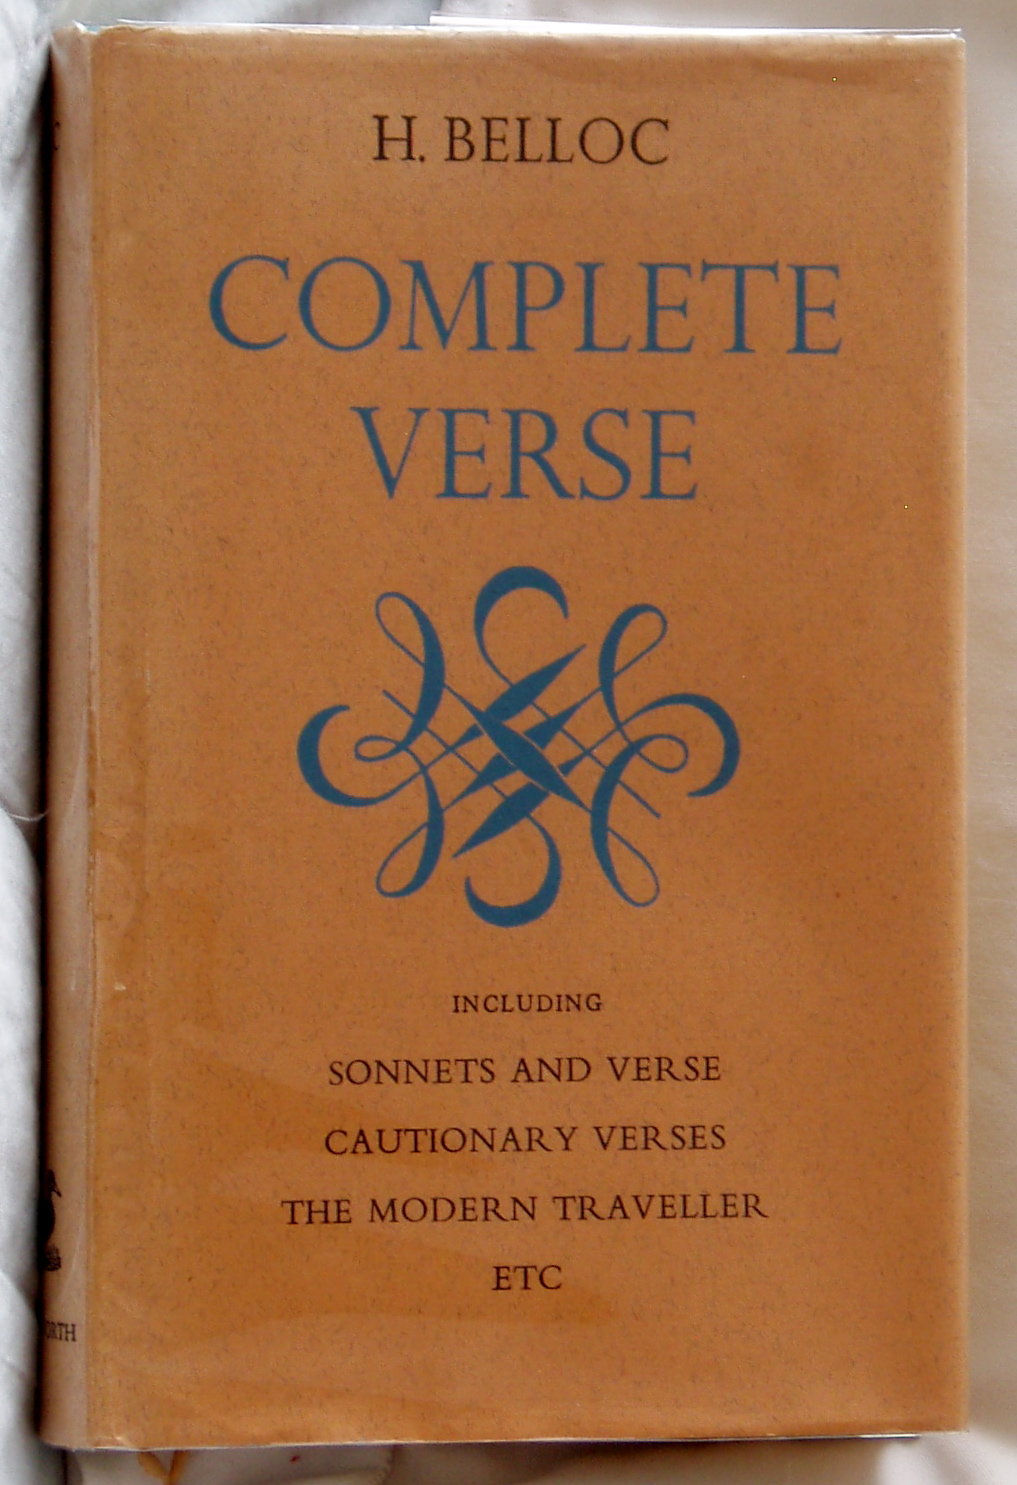 Complete Verse: Including Sonnets and Verse, Cautionary Verses, The Modern Traveller, Etc